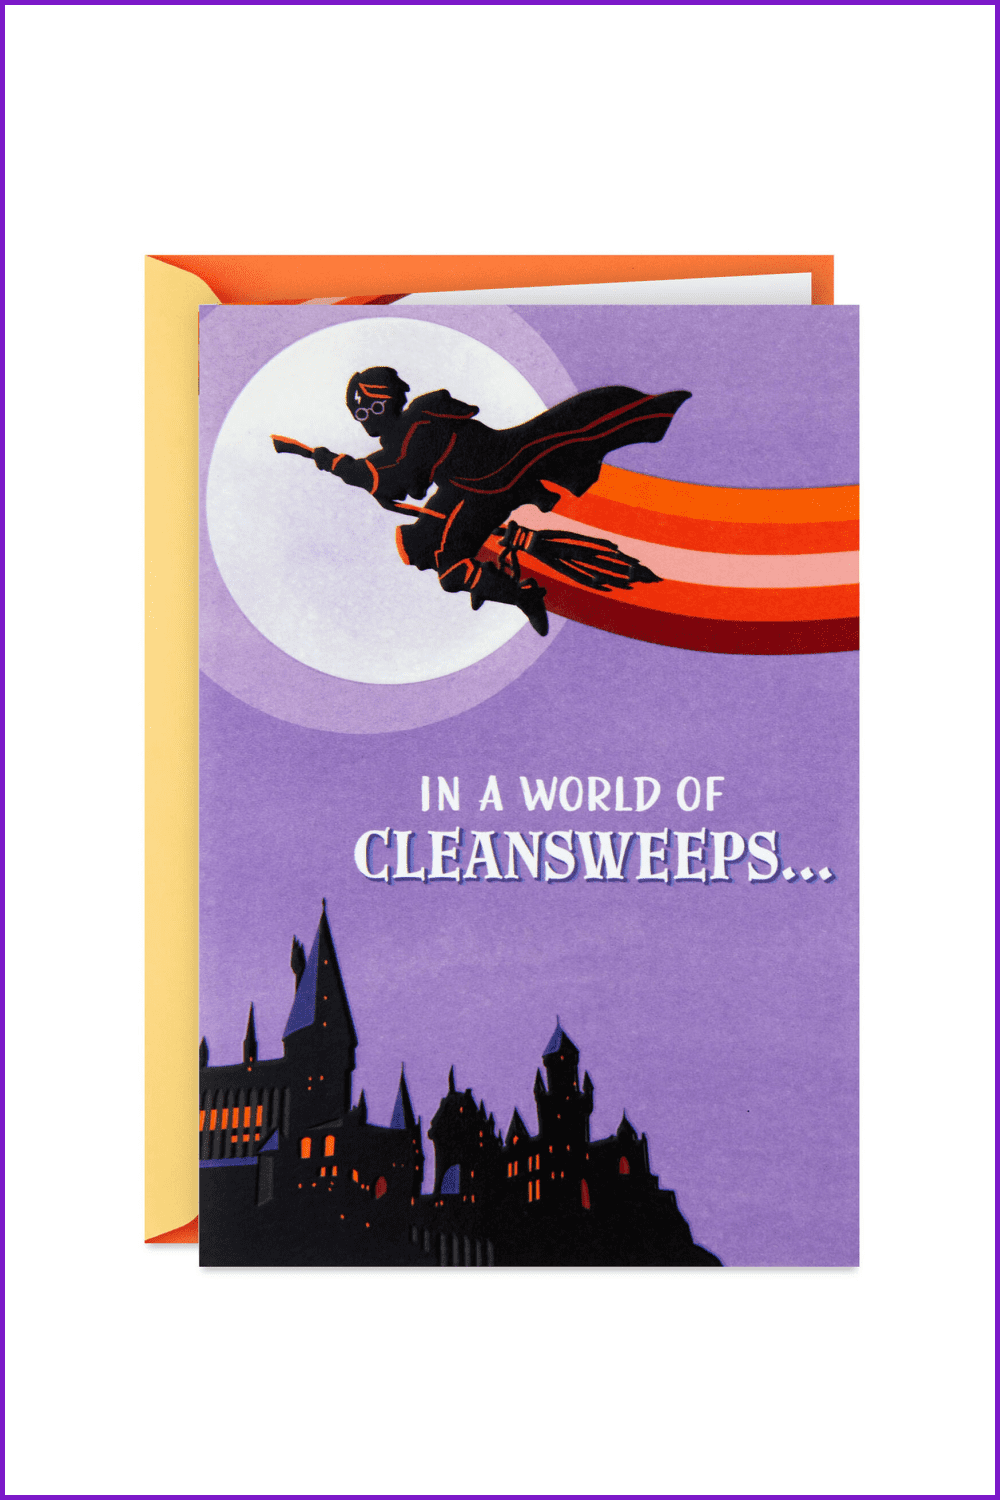 Drawn Harry Potter flies on a broom against the backdrop of Hogwarts.